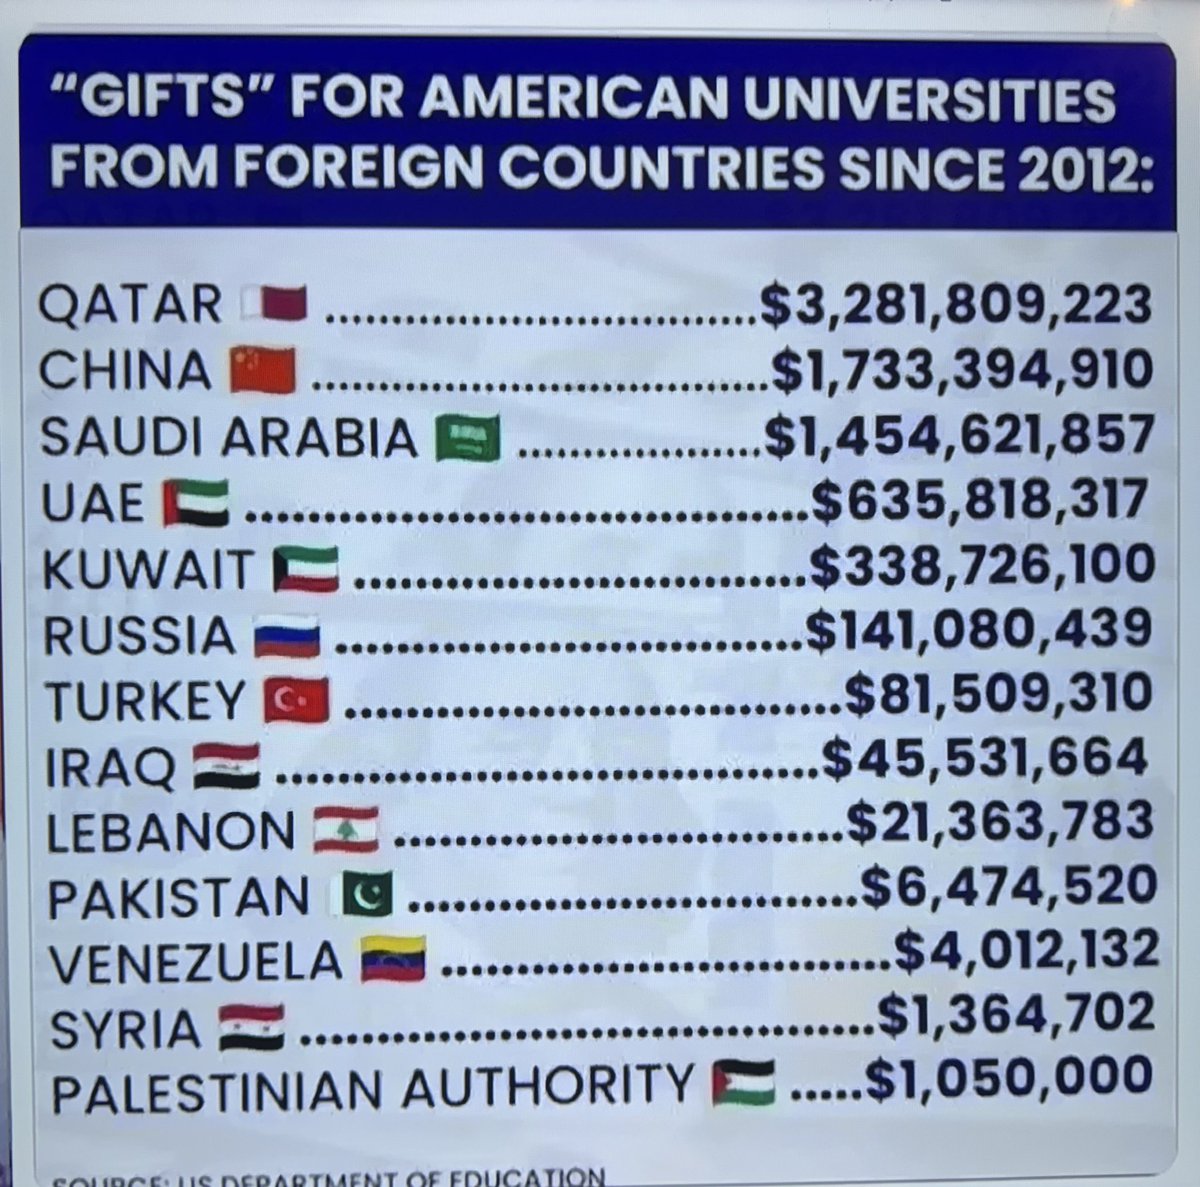 @DC_Draino @its_gabbygabs Also funded by many of our adversaries. Take a look at this chart from the Department of Education. It’s absolutely disgusting! I guarantee you the many professors and the universities have to toe the line or they lose their funding from those who are bankrolling them, who by…